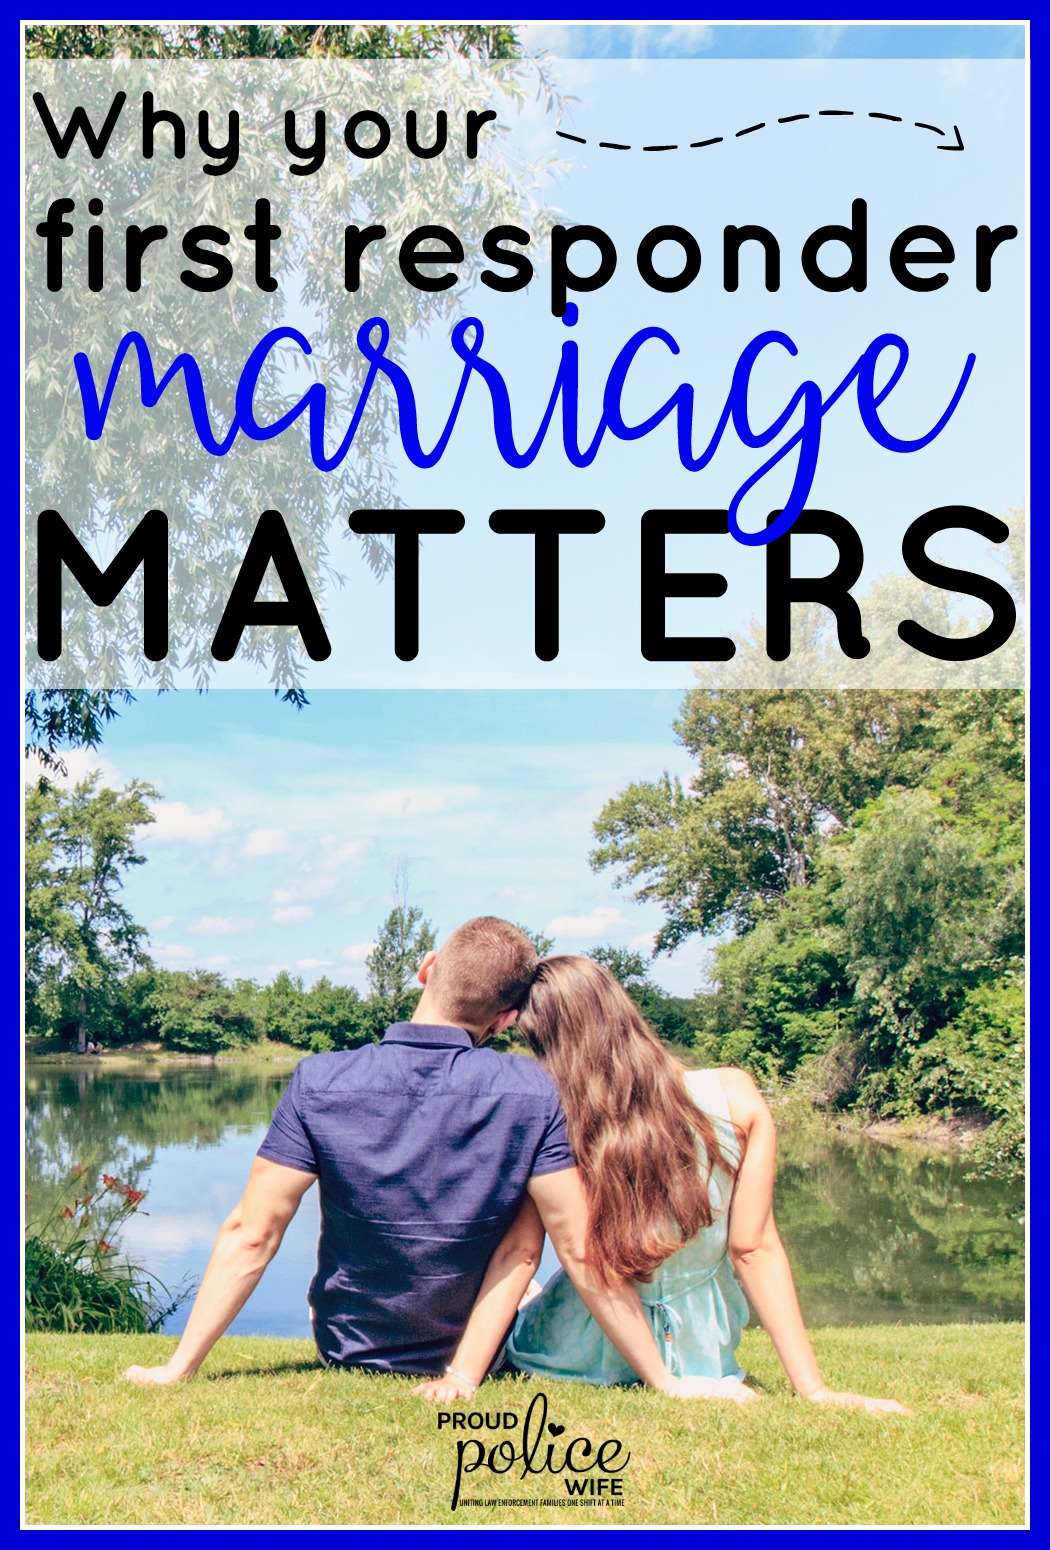 Why your first responder marriage matters| police wife | proud police wife | first responders | Chris Kyle Frog Foundation | marriage